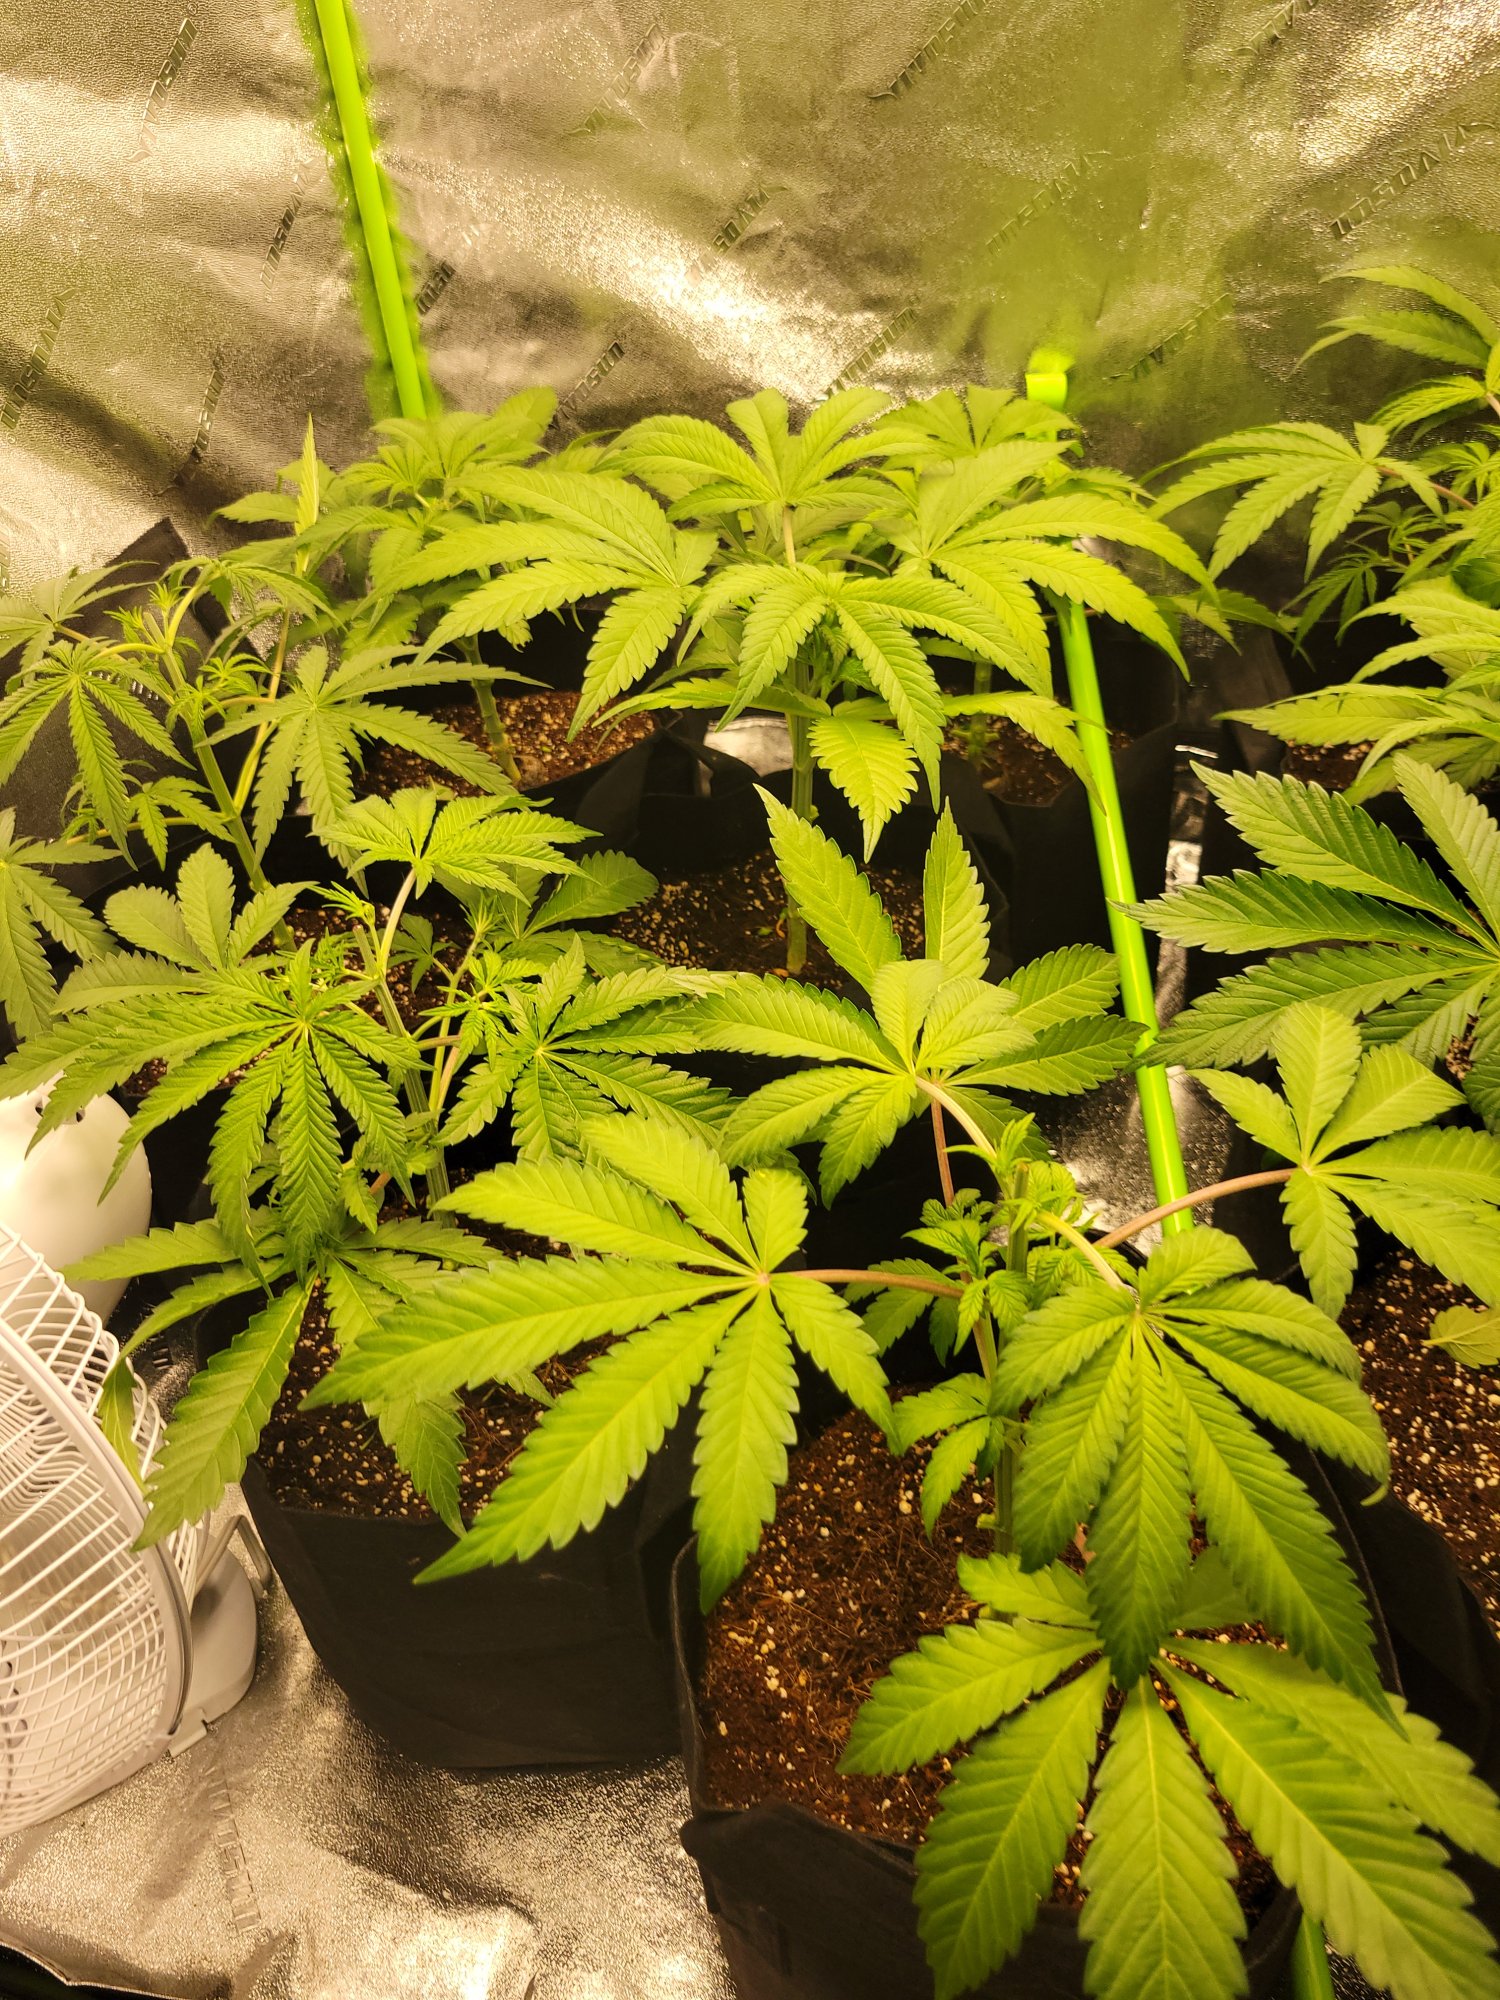 New grow questions for the knowledgeable 18